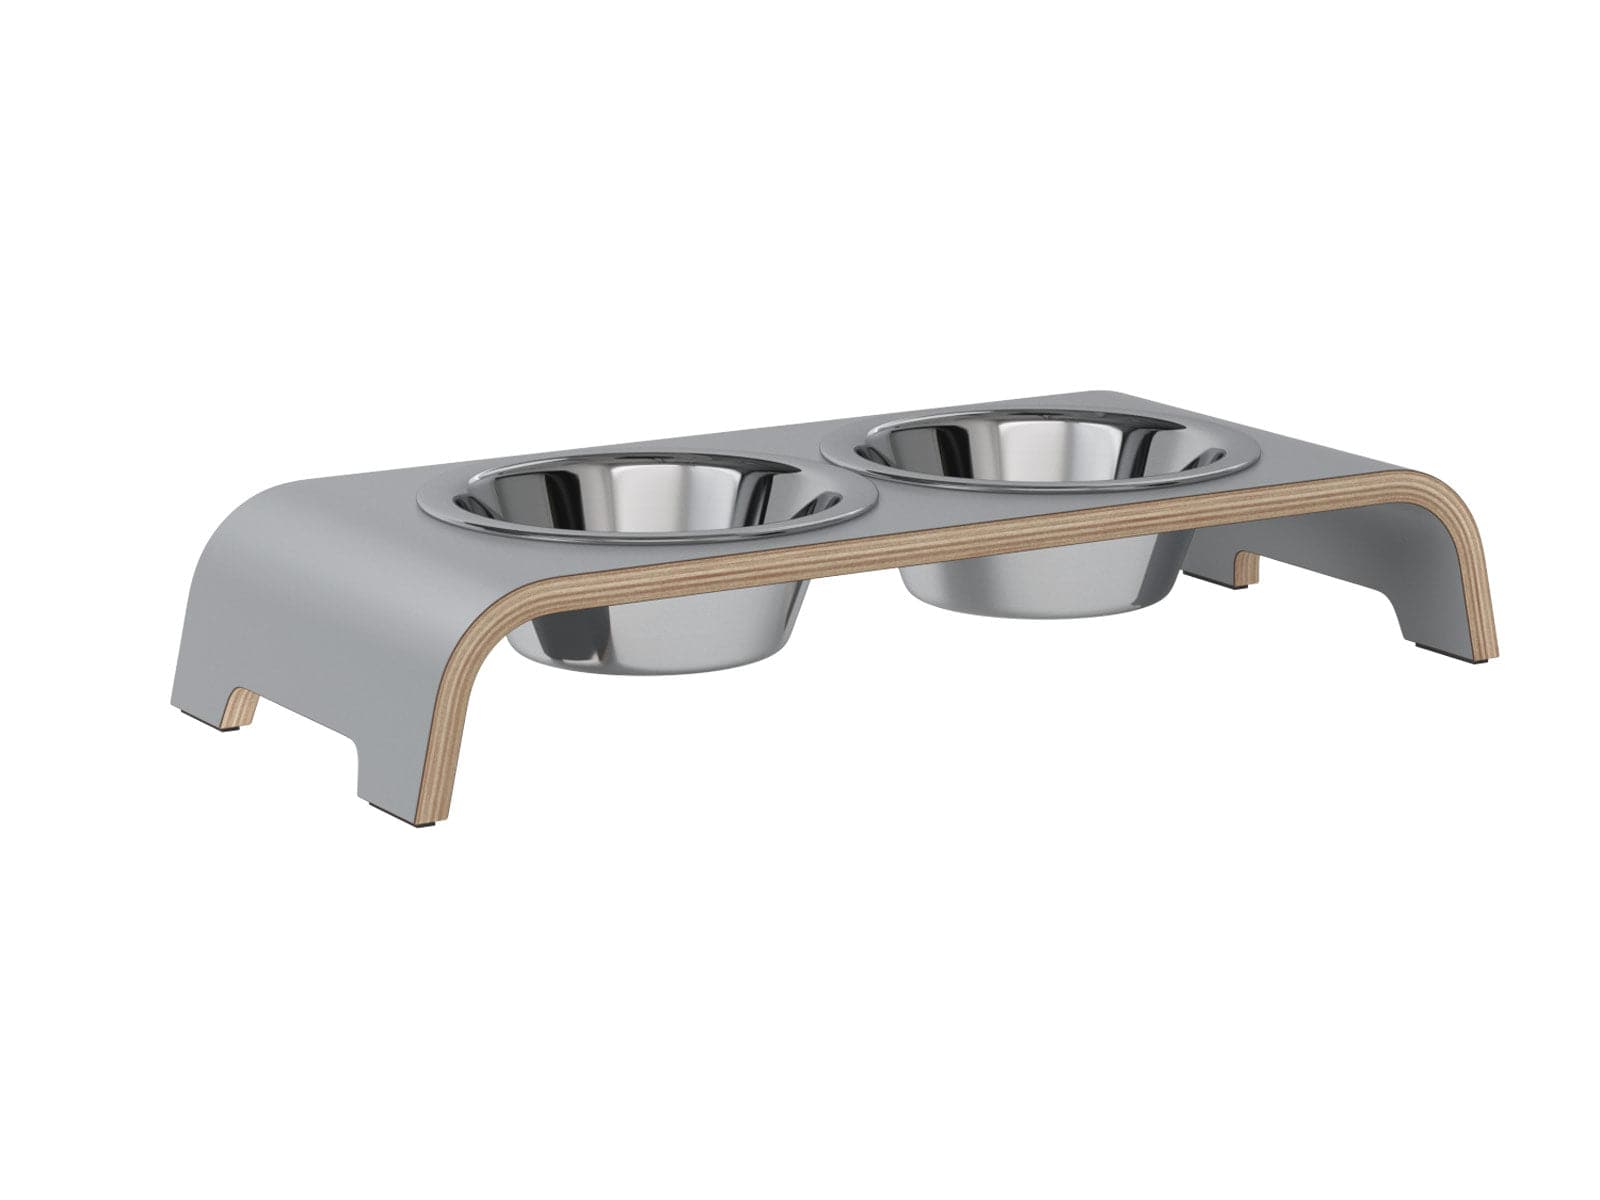 Dog Stands for Bowls With stainless steel bowls